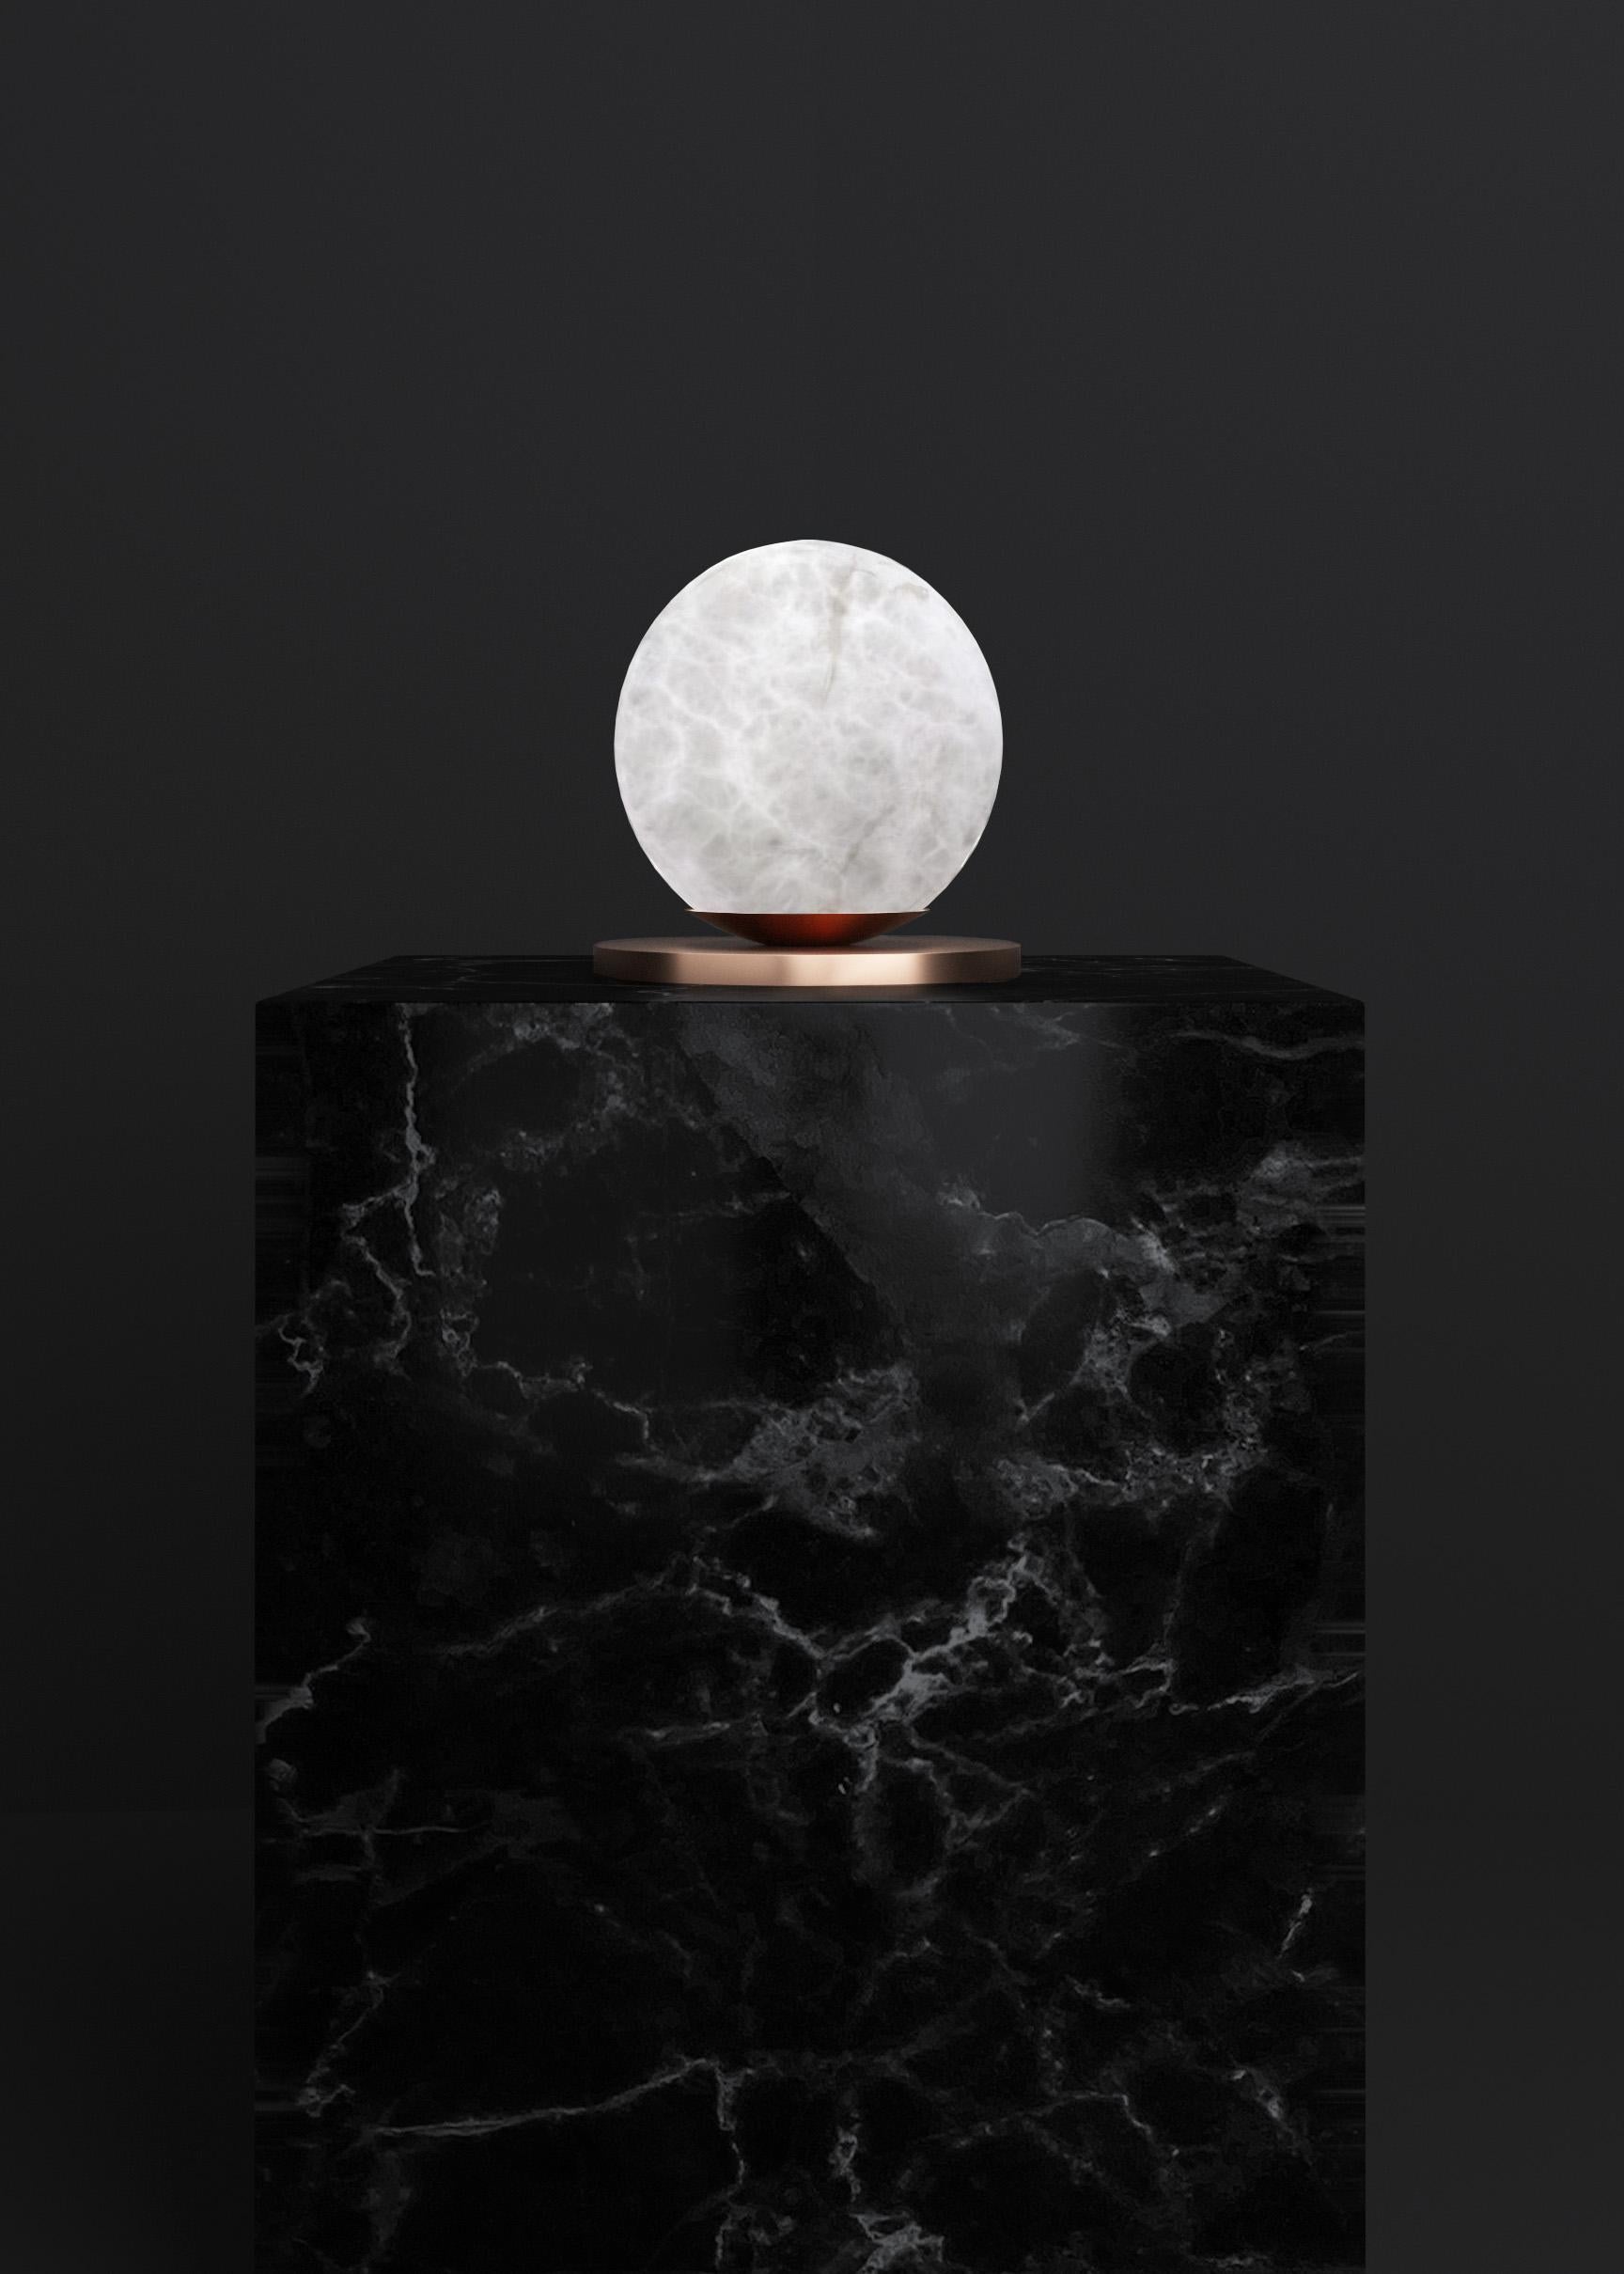 Ofione Copper Table Lamp by Alabastro Italiano
Dimensions: D 16 x W 16 x H 16 cm.
Materials: White alabaster and copper.

Available in different finishes: Shiny Silver, Bronze, Brushed Brass, Ruggine of Florence, Brushed Burnished, Shiny Gold,